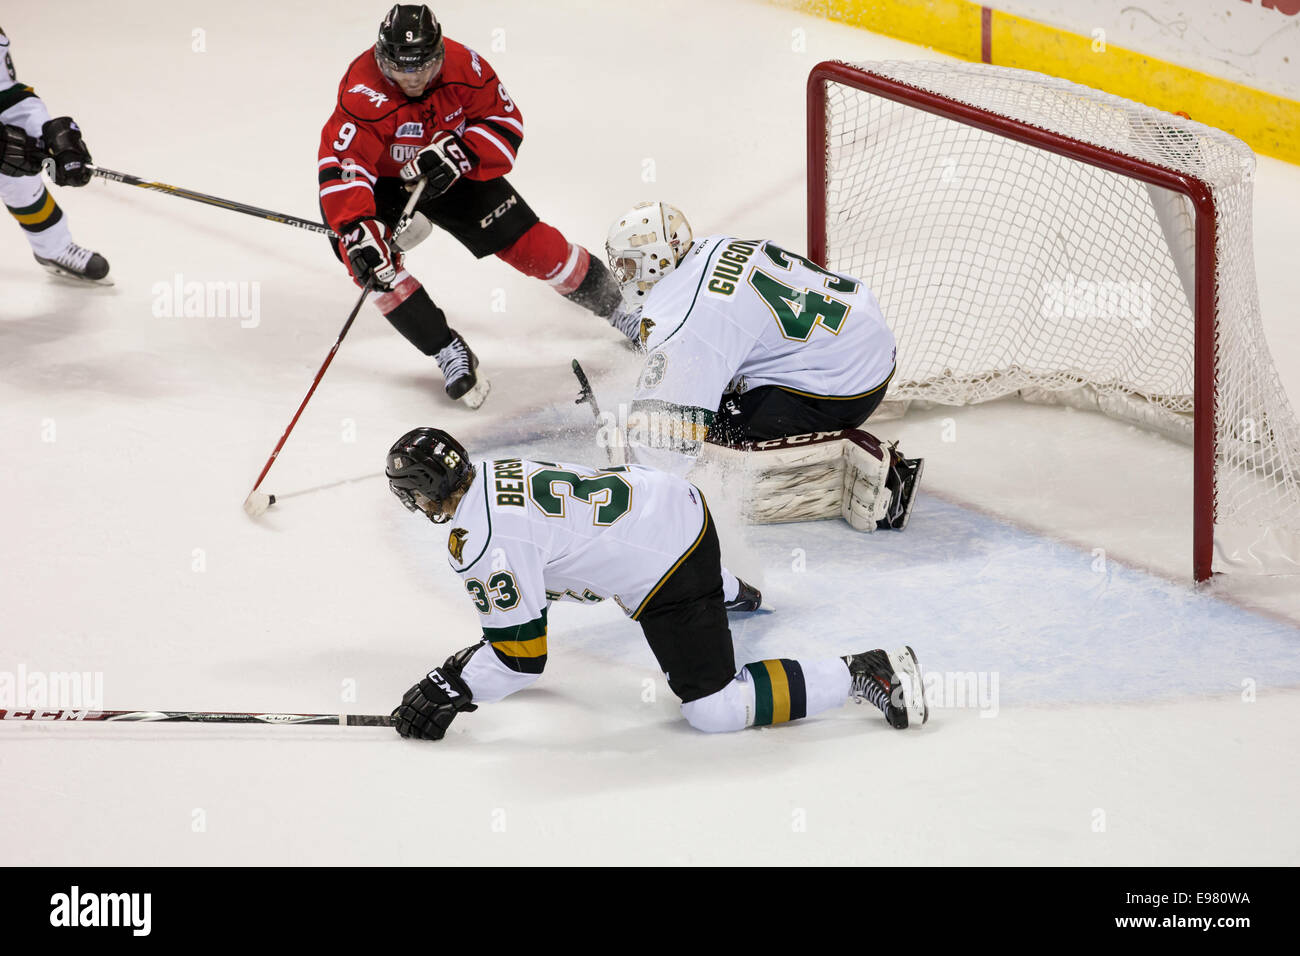 October 17, 2014. London Knights goalie Michael Giugovaz (43) prepares for a shot from Owen Sound player Ethan Szypula (9) durin Stock Photo